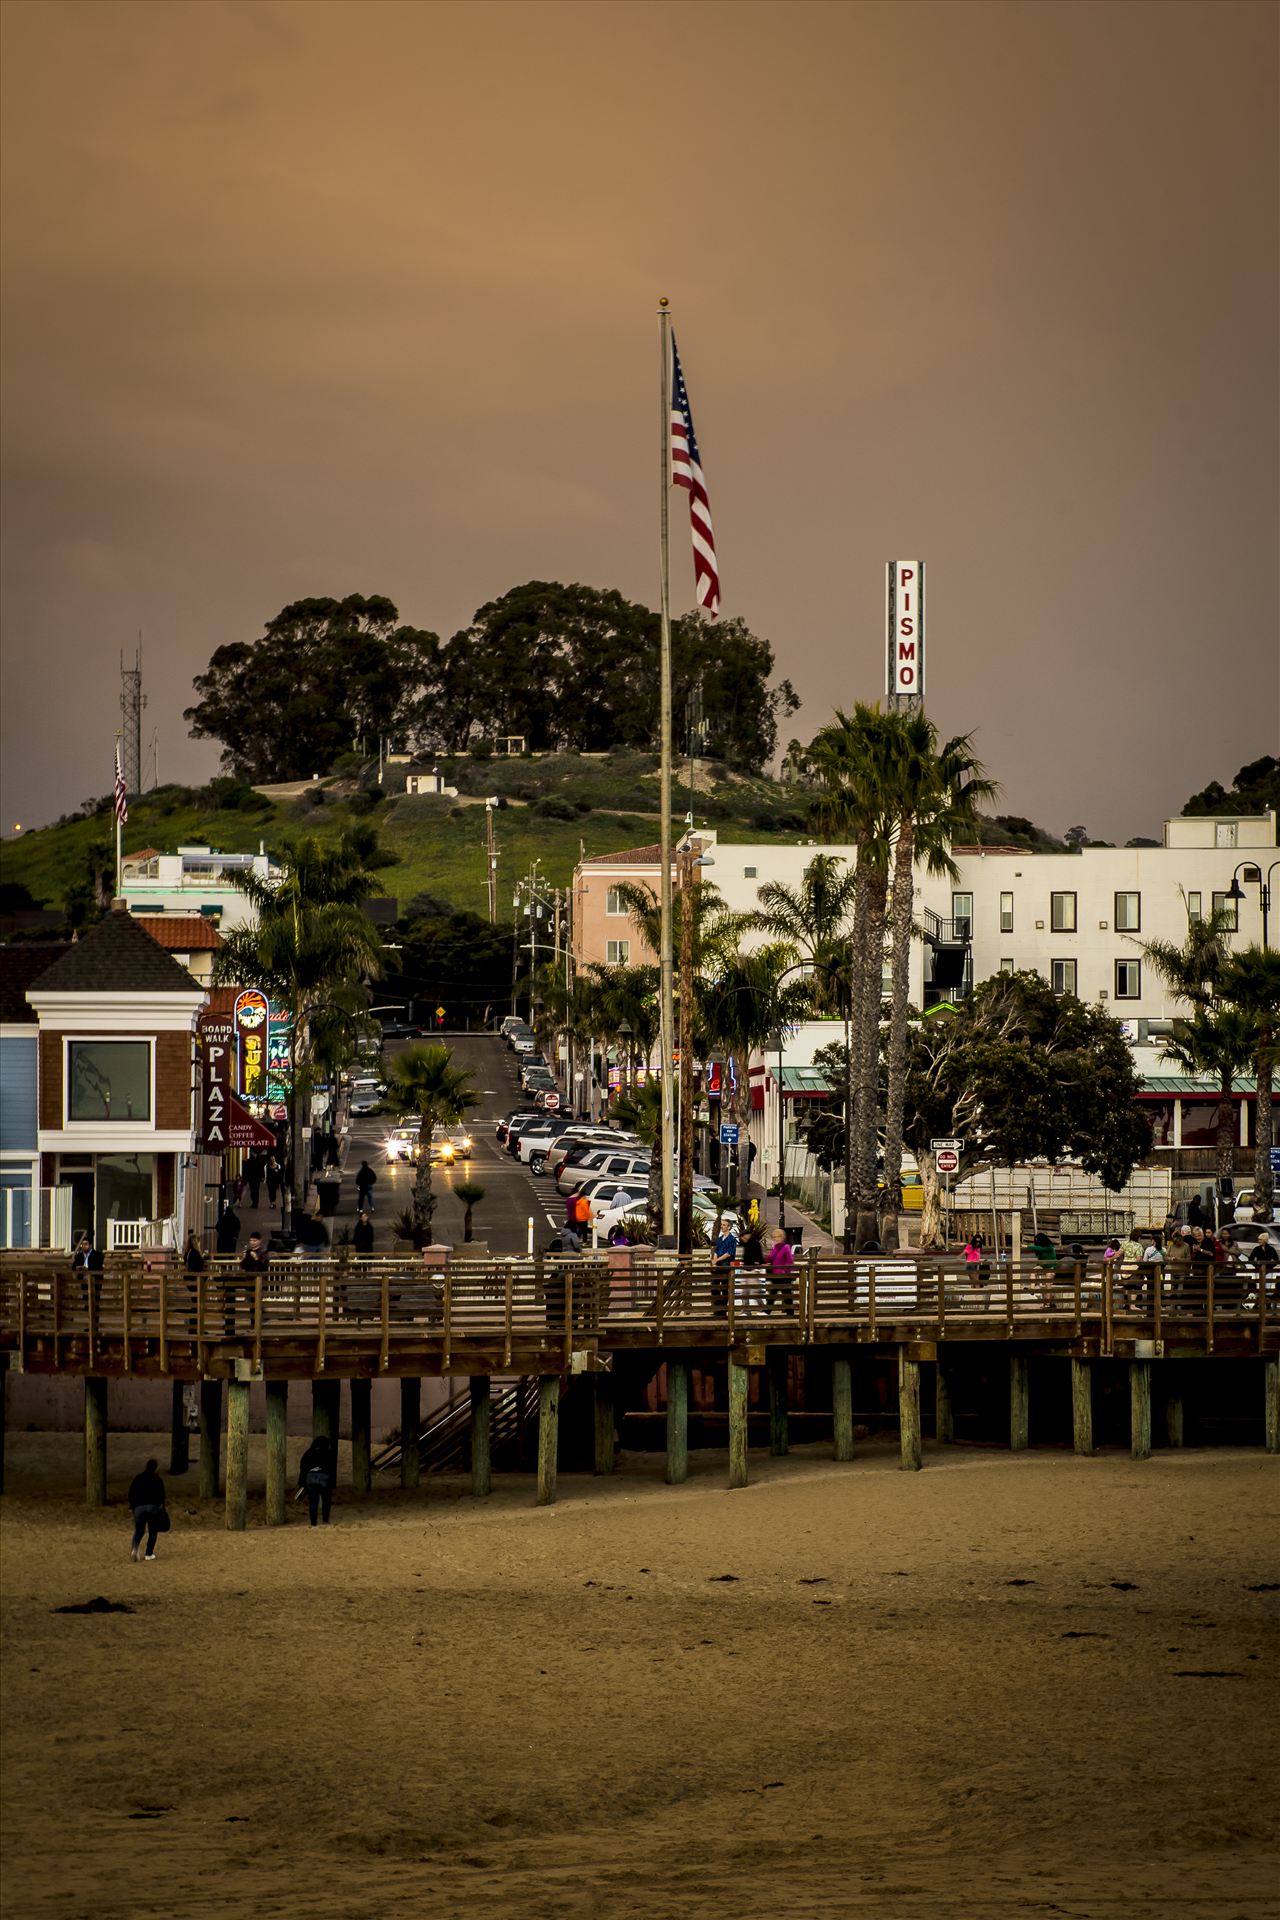 Stormy Downtown Pismo.jpg - Stormy day in downtown Pismo Beach, California. by Sarah Williams